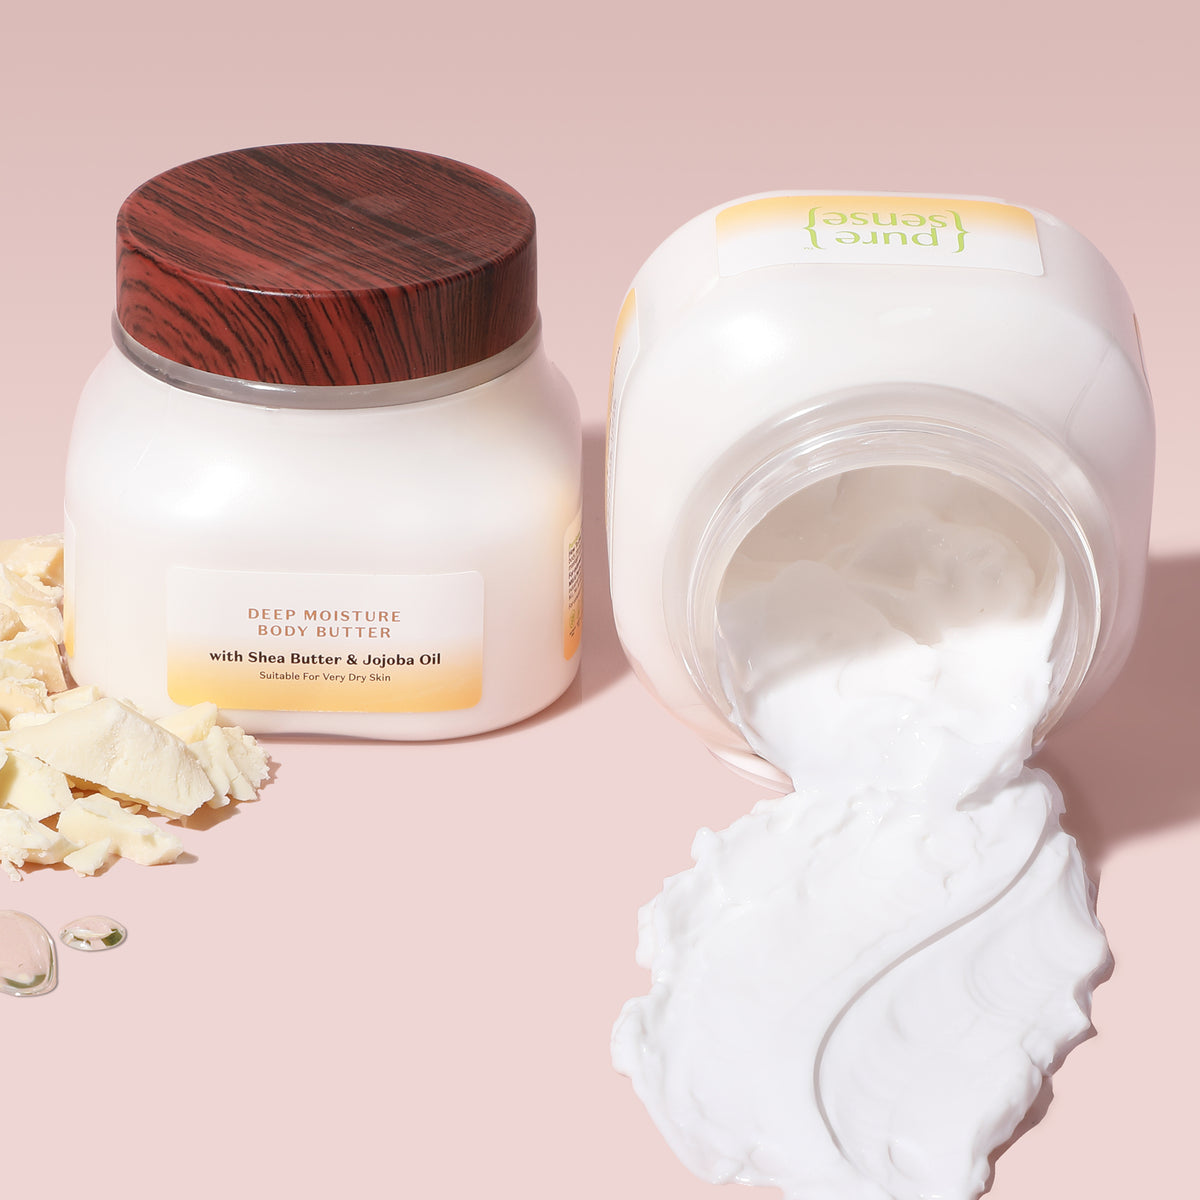 Deep Moisture Body Butter | From the makers of Parachute Advansed | 160ml